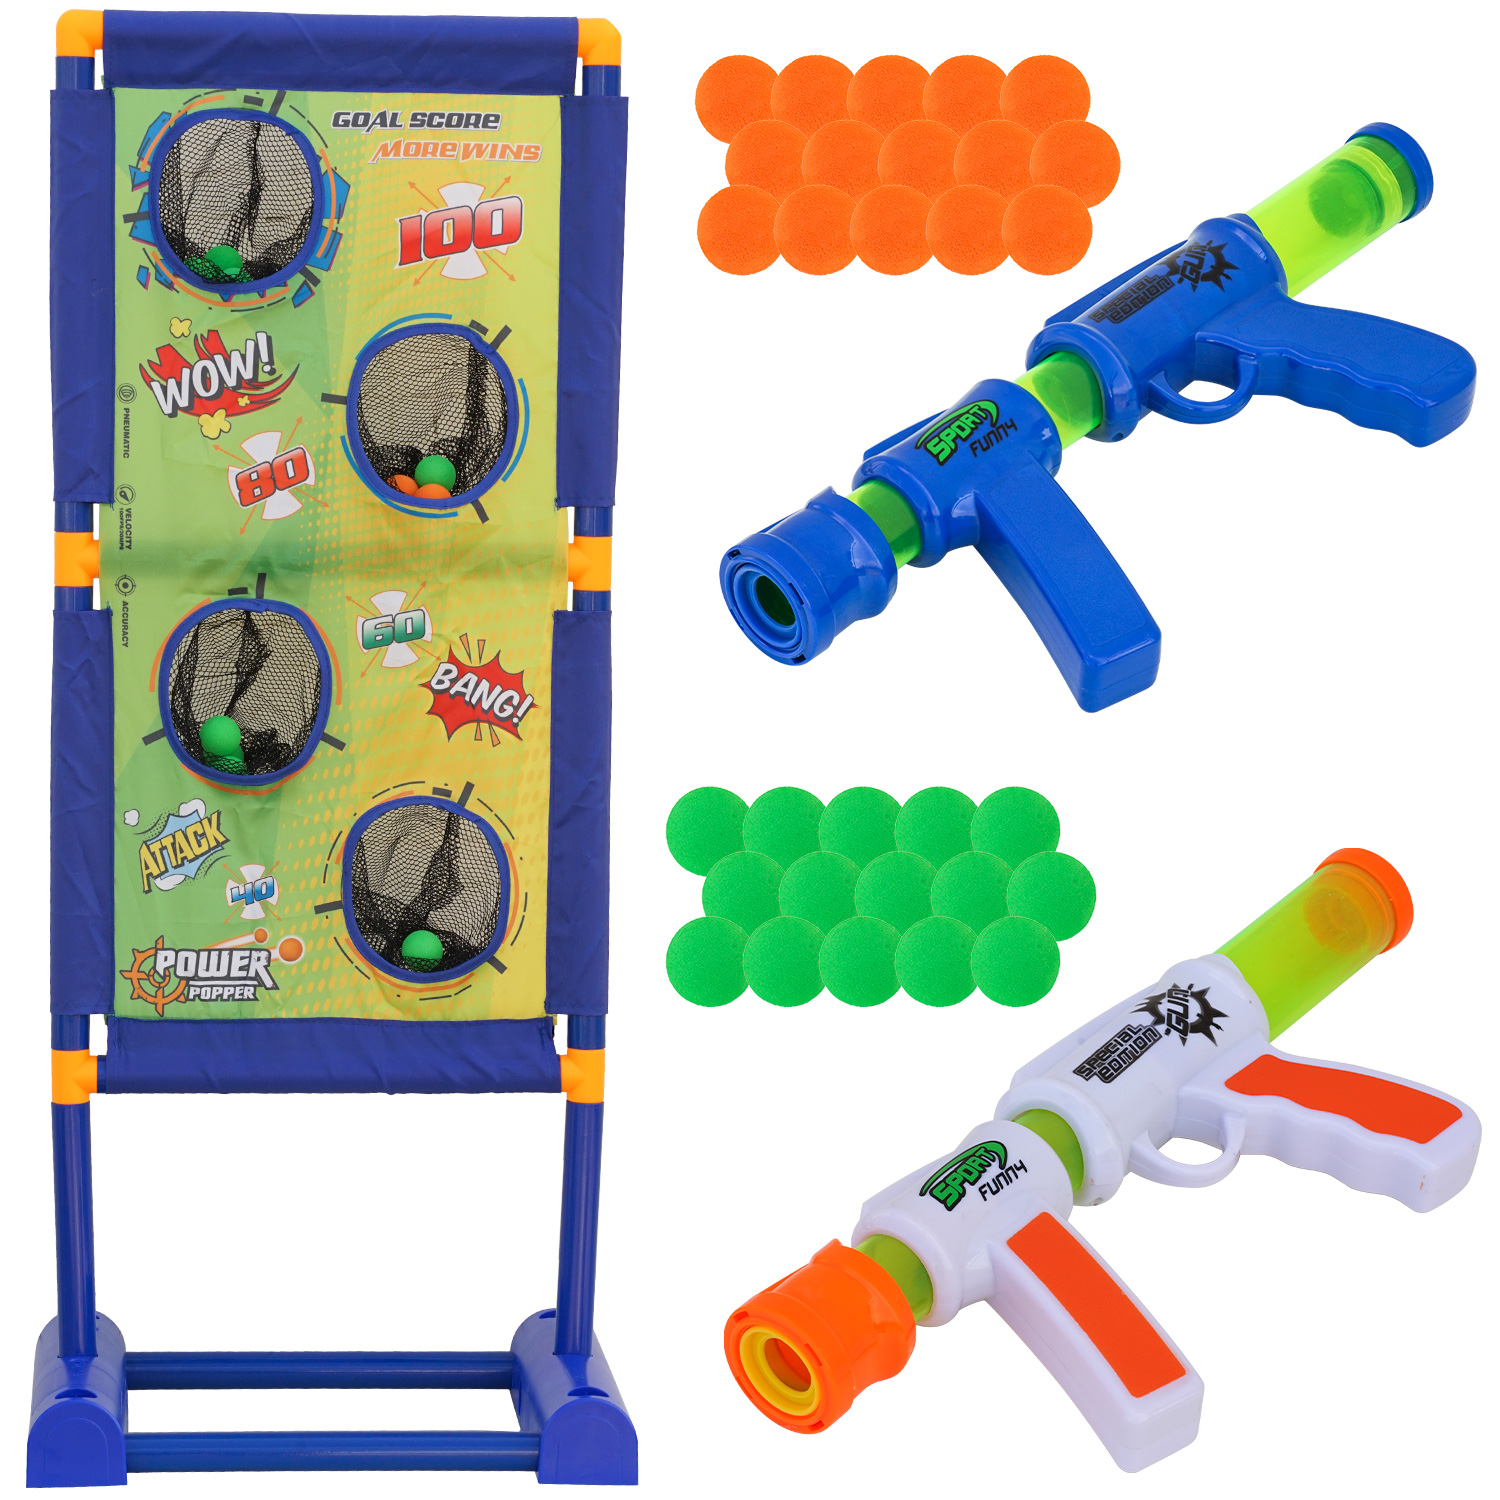 2pk Soft Foam Ball Popper Toys Guns and 30 Foam Balls with Self Moving Shooting Target Fun Indoor and Outdoor Shooting Game Toy for for Boys and Girls